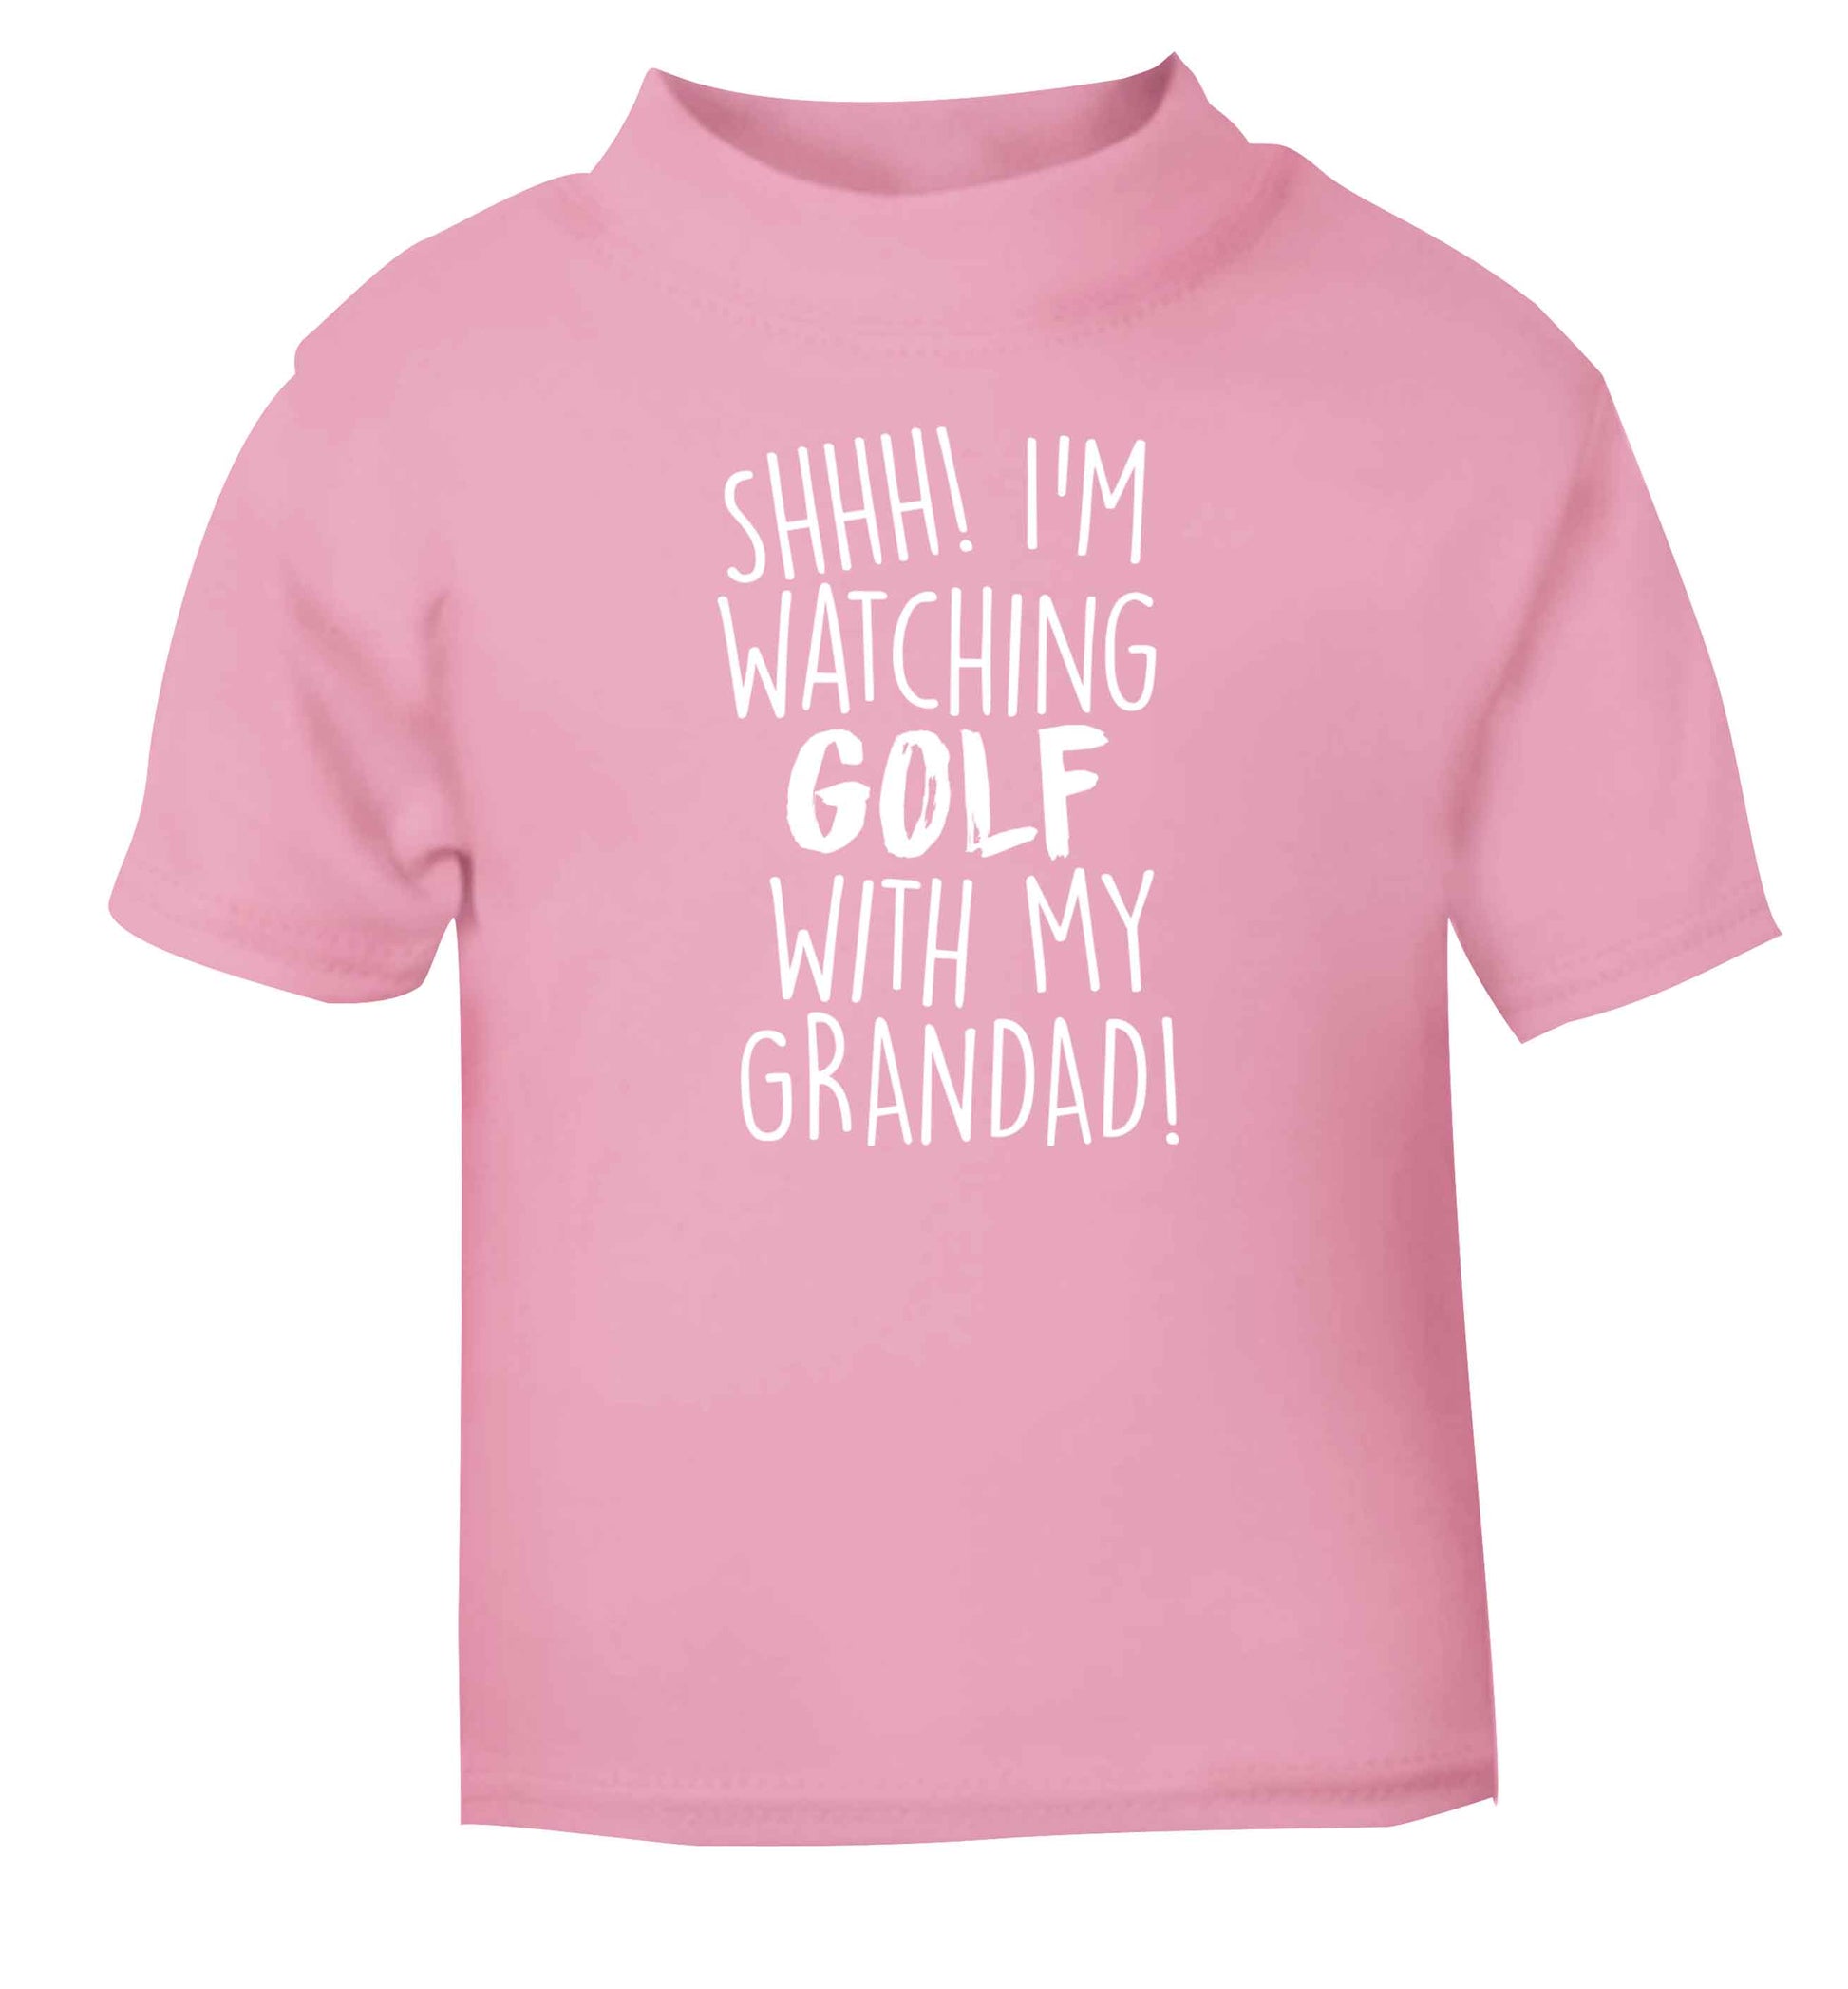 Shh I'm watching golf with my grandad light pink Baby Toddler Tshirt 2 Years